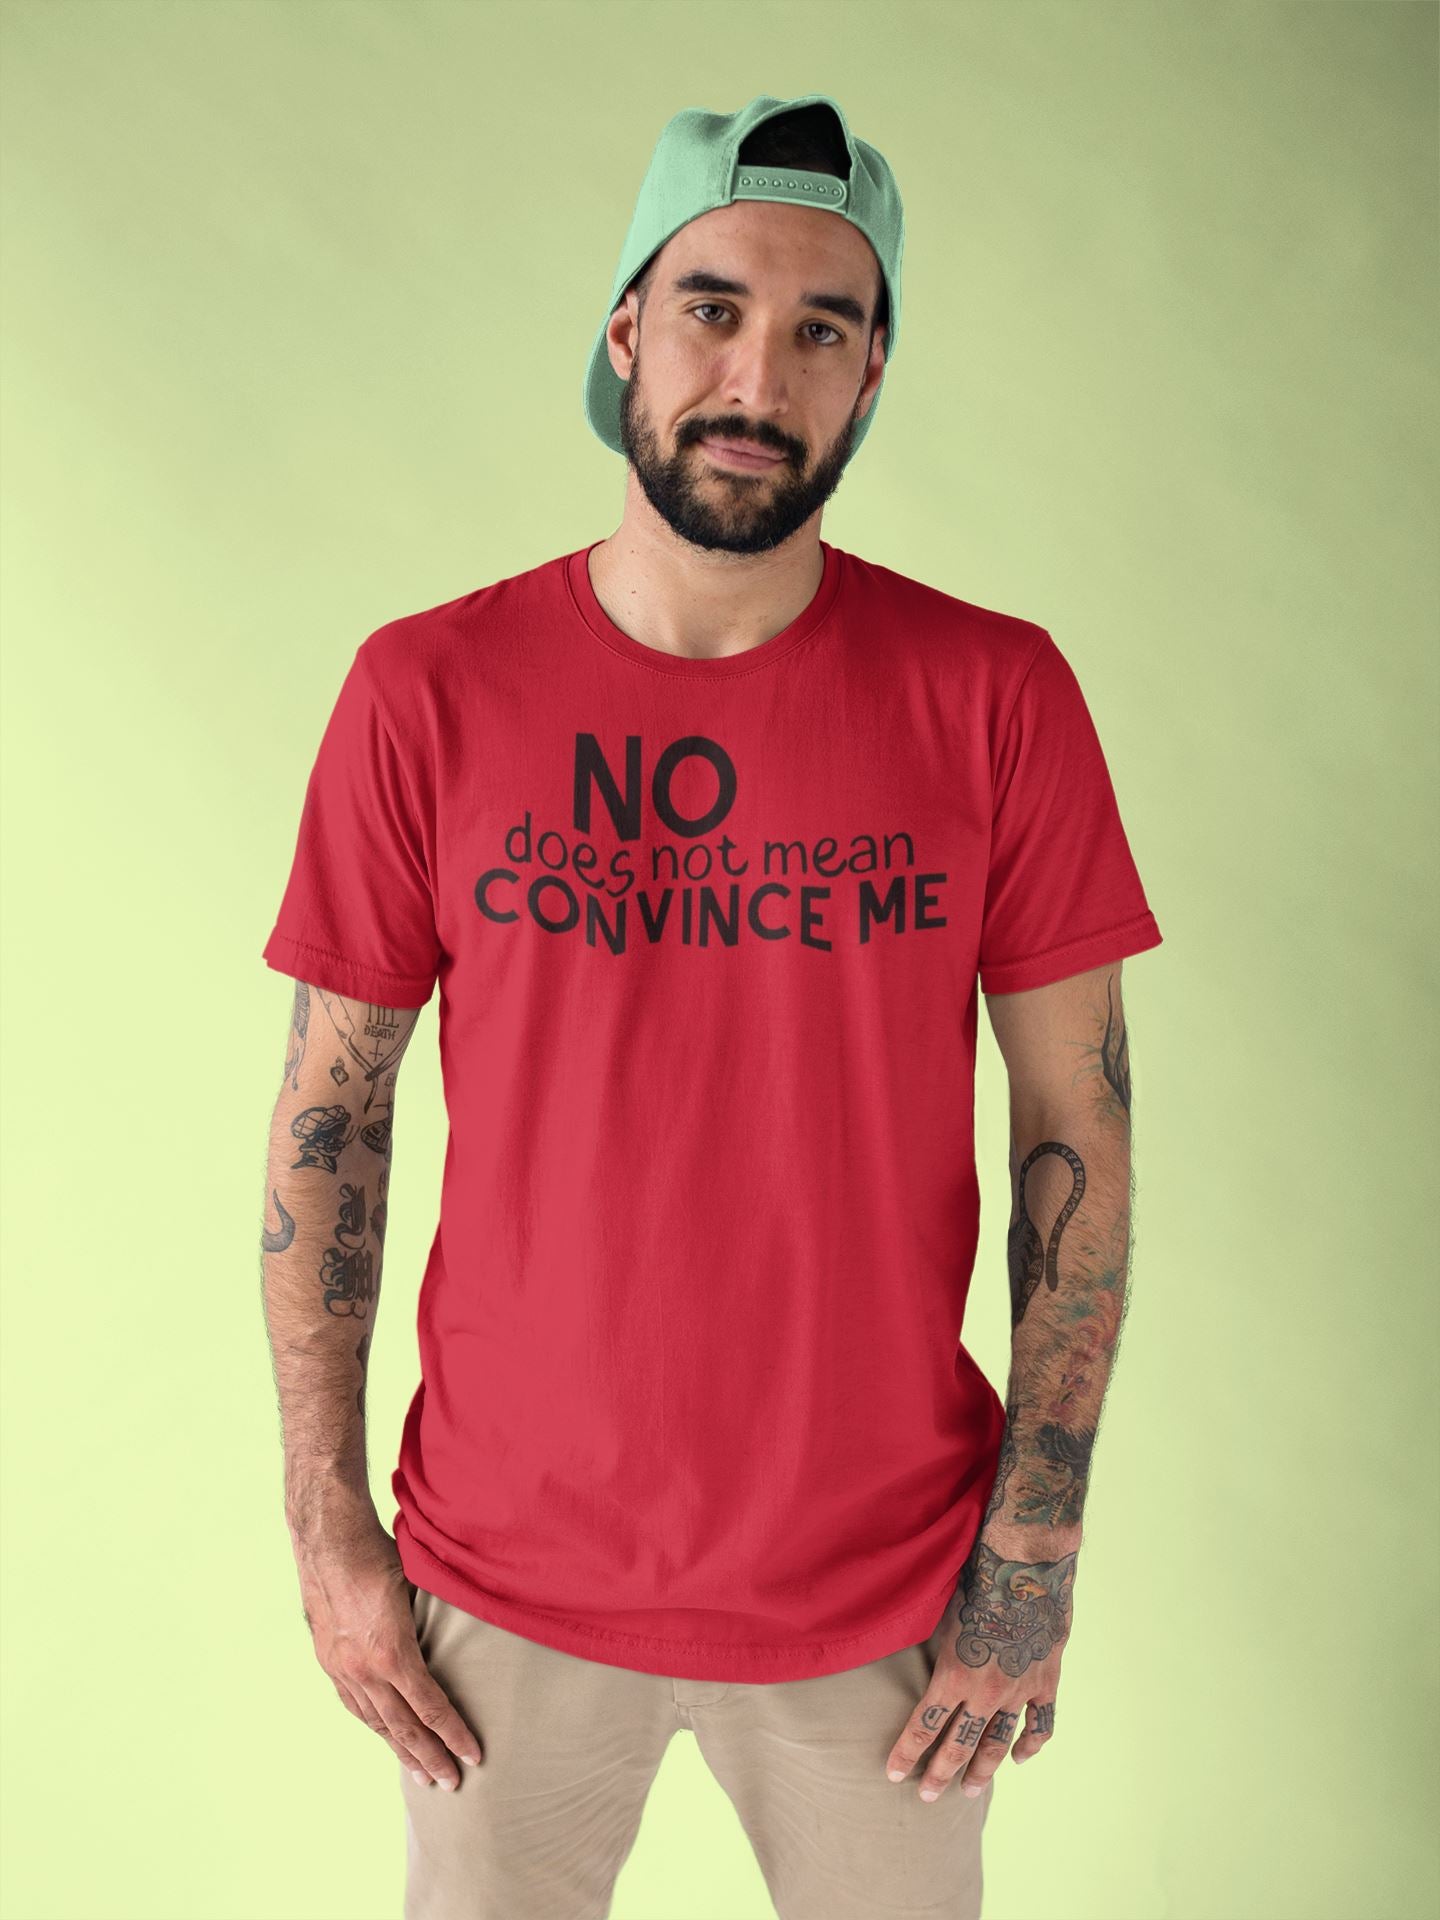 No Does Not Mean Convince Me No Cap Red T Shirt for Men and Women freeshipping - Catch My Drift India